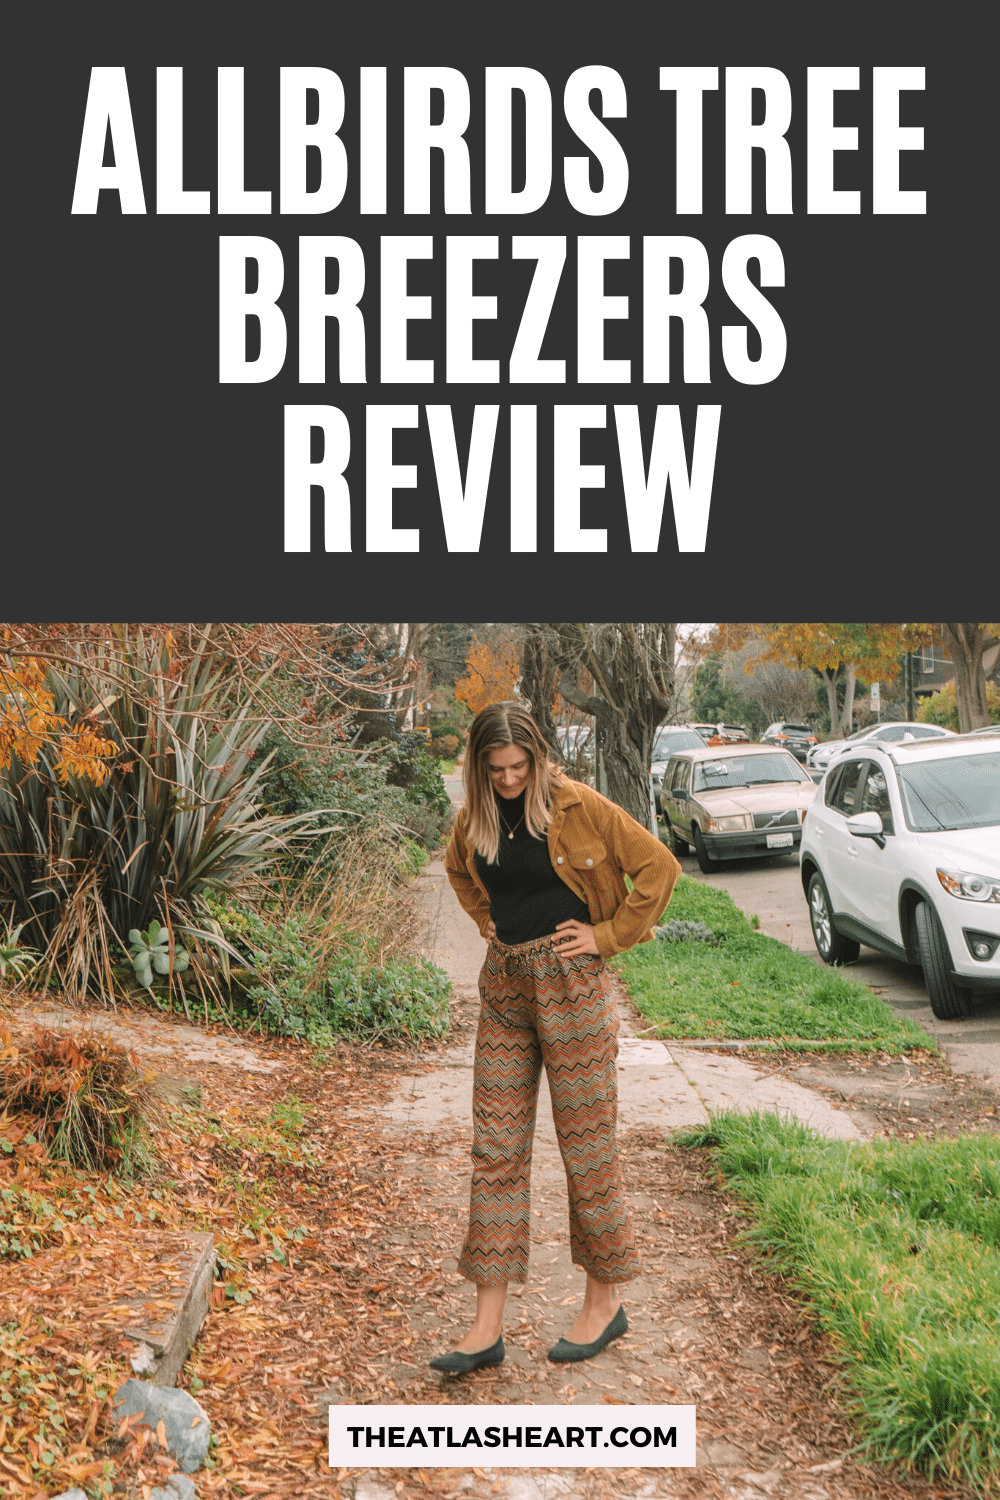 Allbirds Tree Breezers Review: What I Really Thought of Allbirds Flats